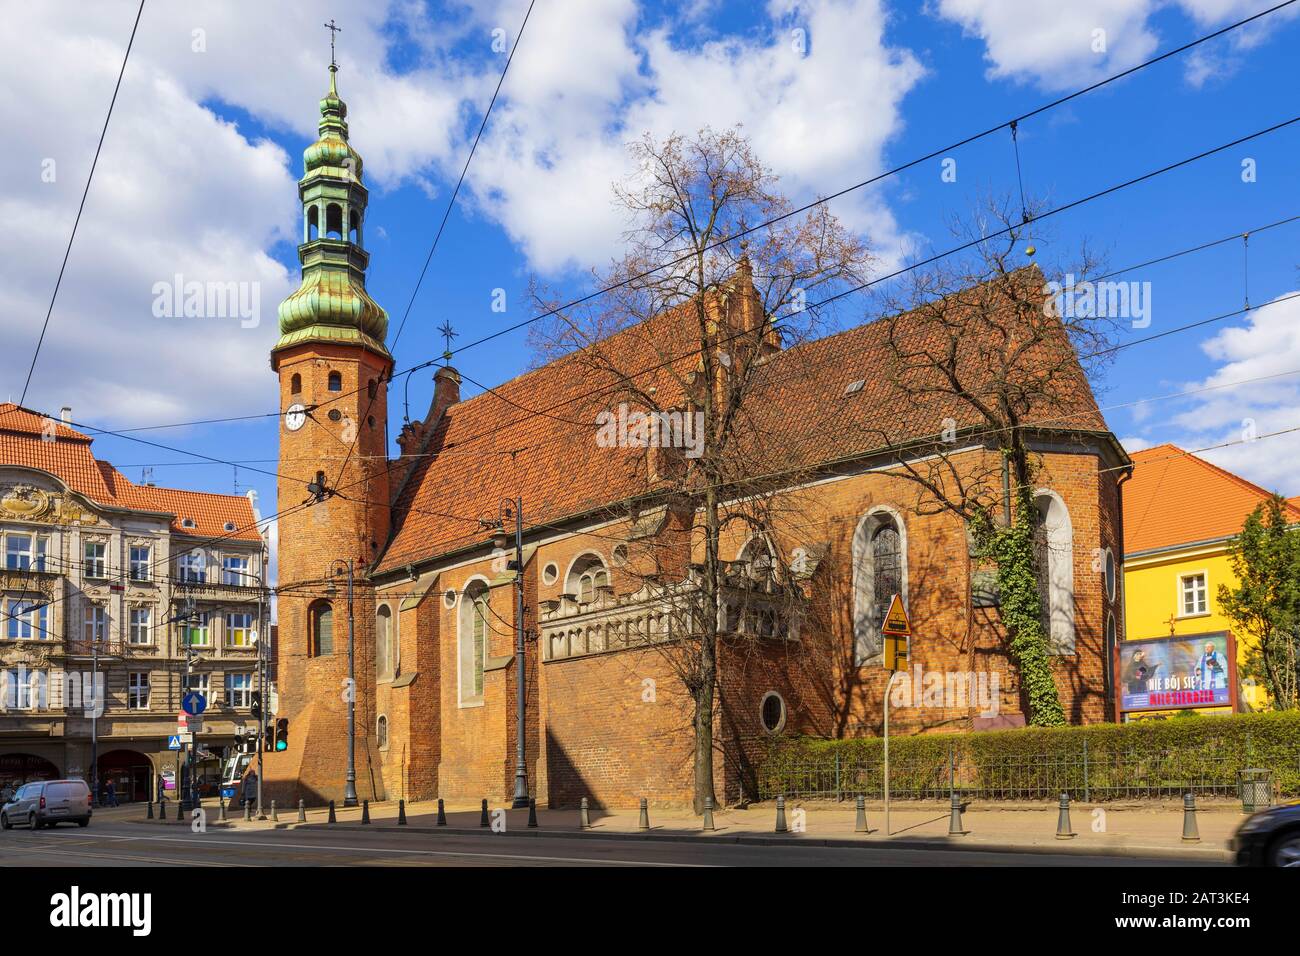 Bydgoszcz, Kujavian-Pomeranian / Poland - 2019/04/01: Exterior of the Poor Clares order church dedicated to the Assumption of the Blessed Virgin Mary in the historic old town quarter Stock Photo